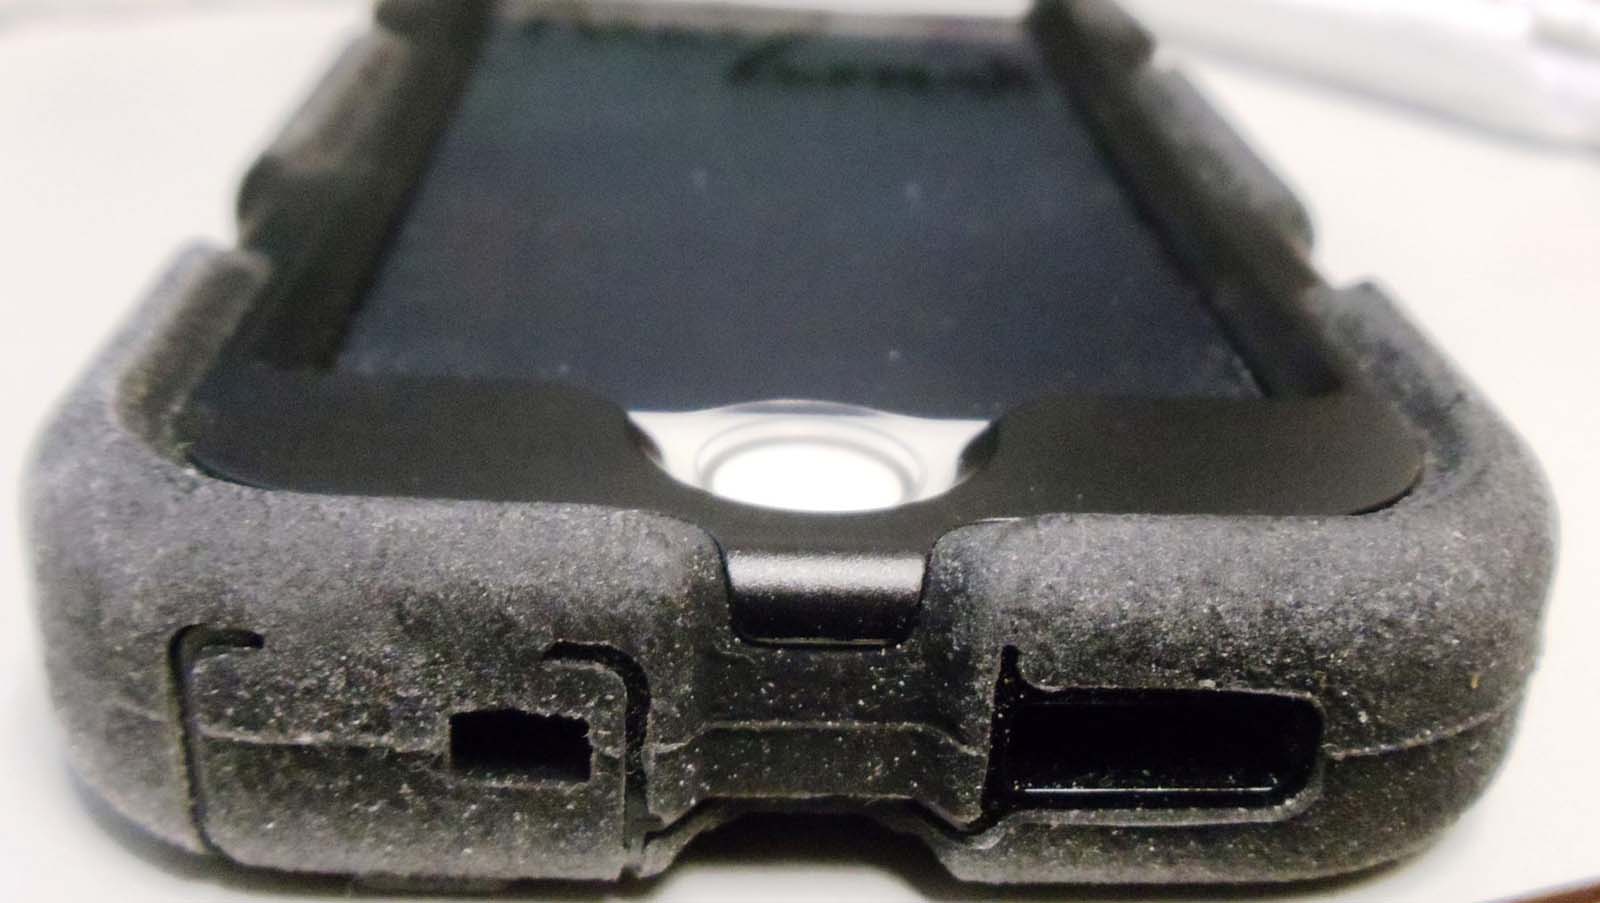 Smart Phone Case, with a phone inside